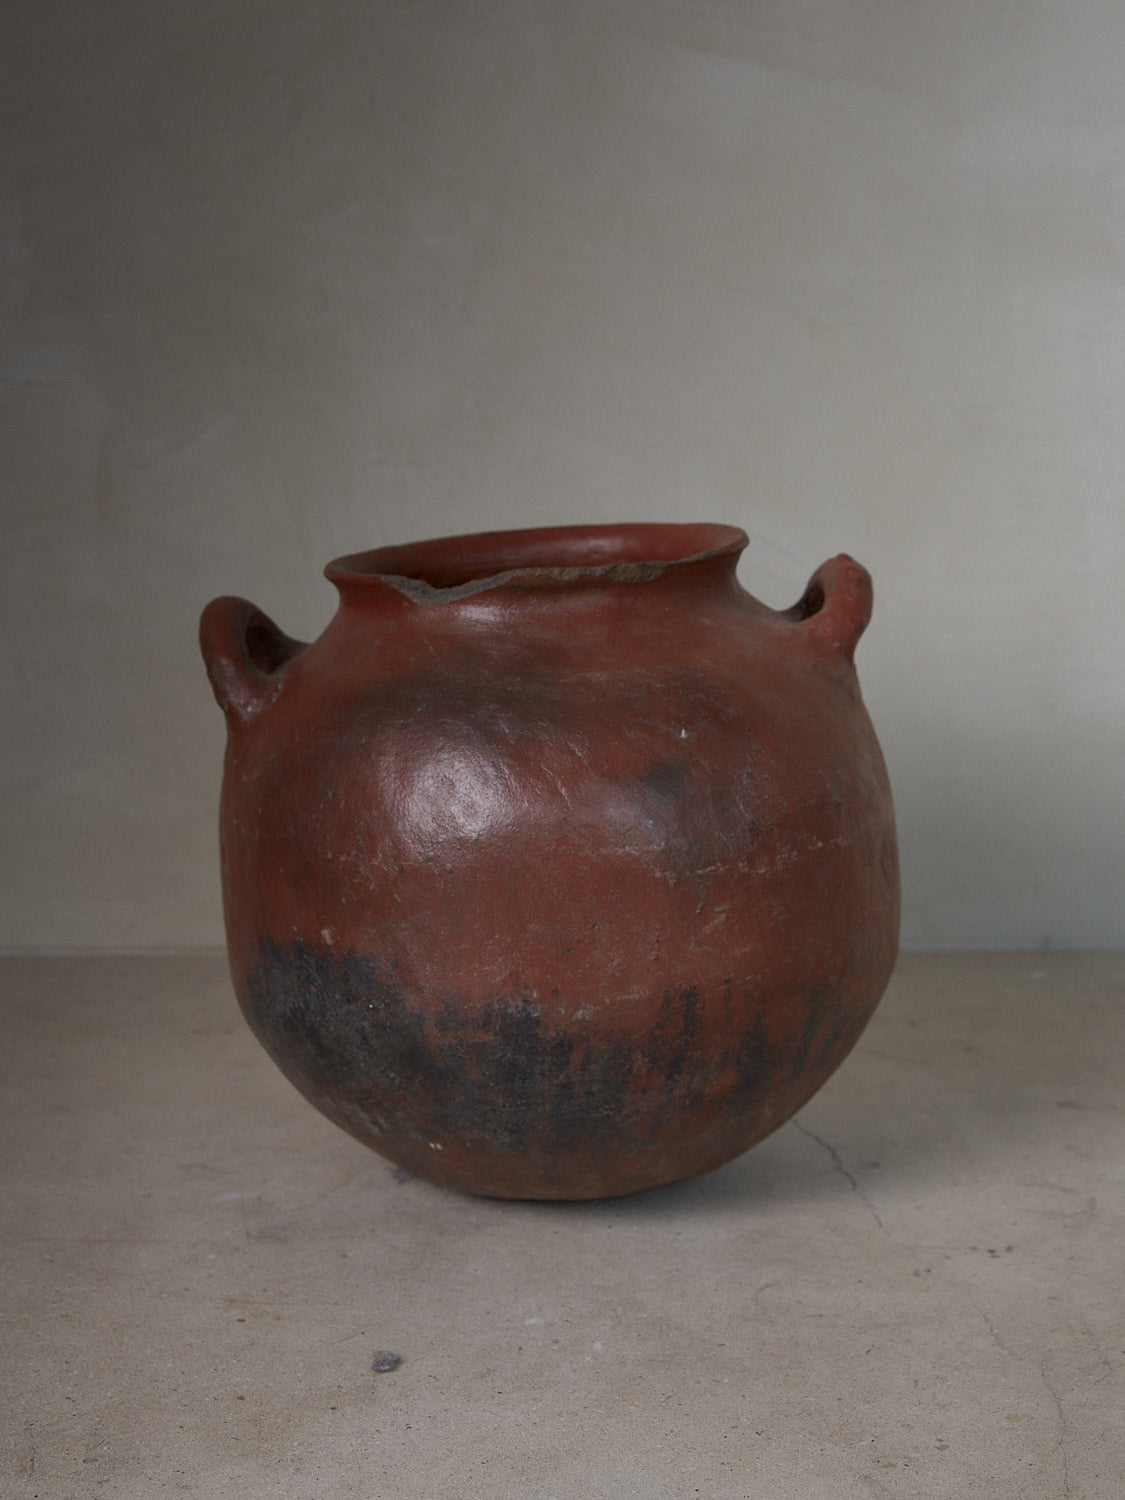 Vase Faris. Rare find. Large antique ceramic vase with round bodice, wide lip and low-sitting handle details at sides.